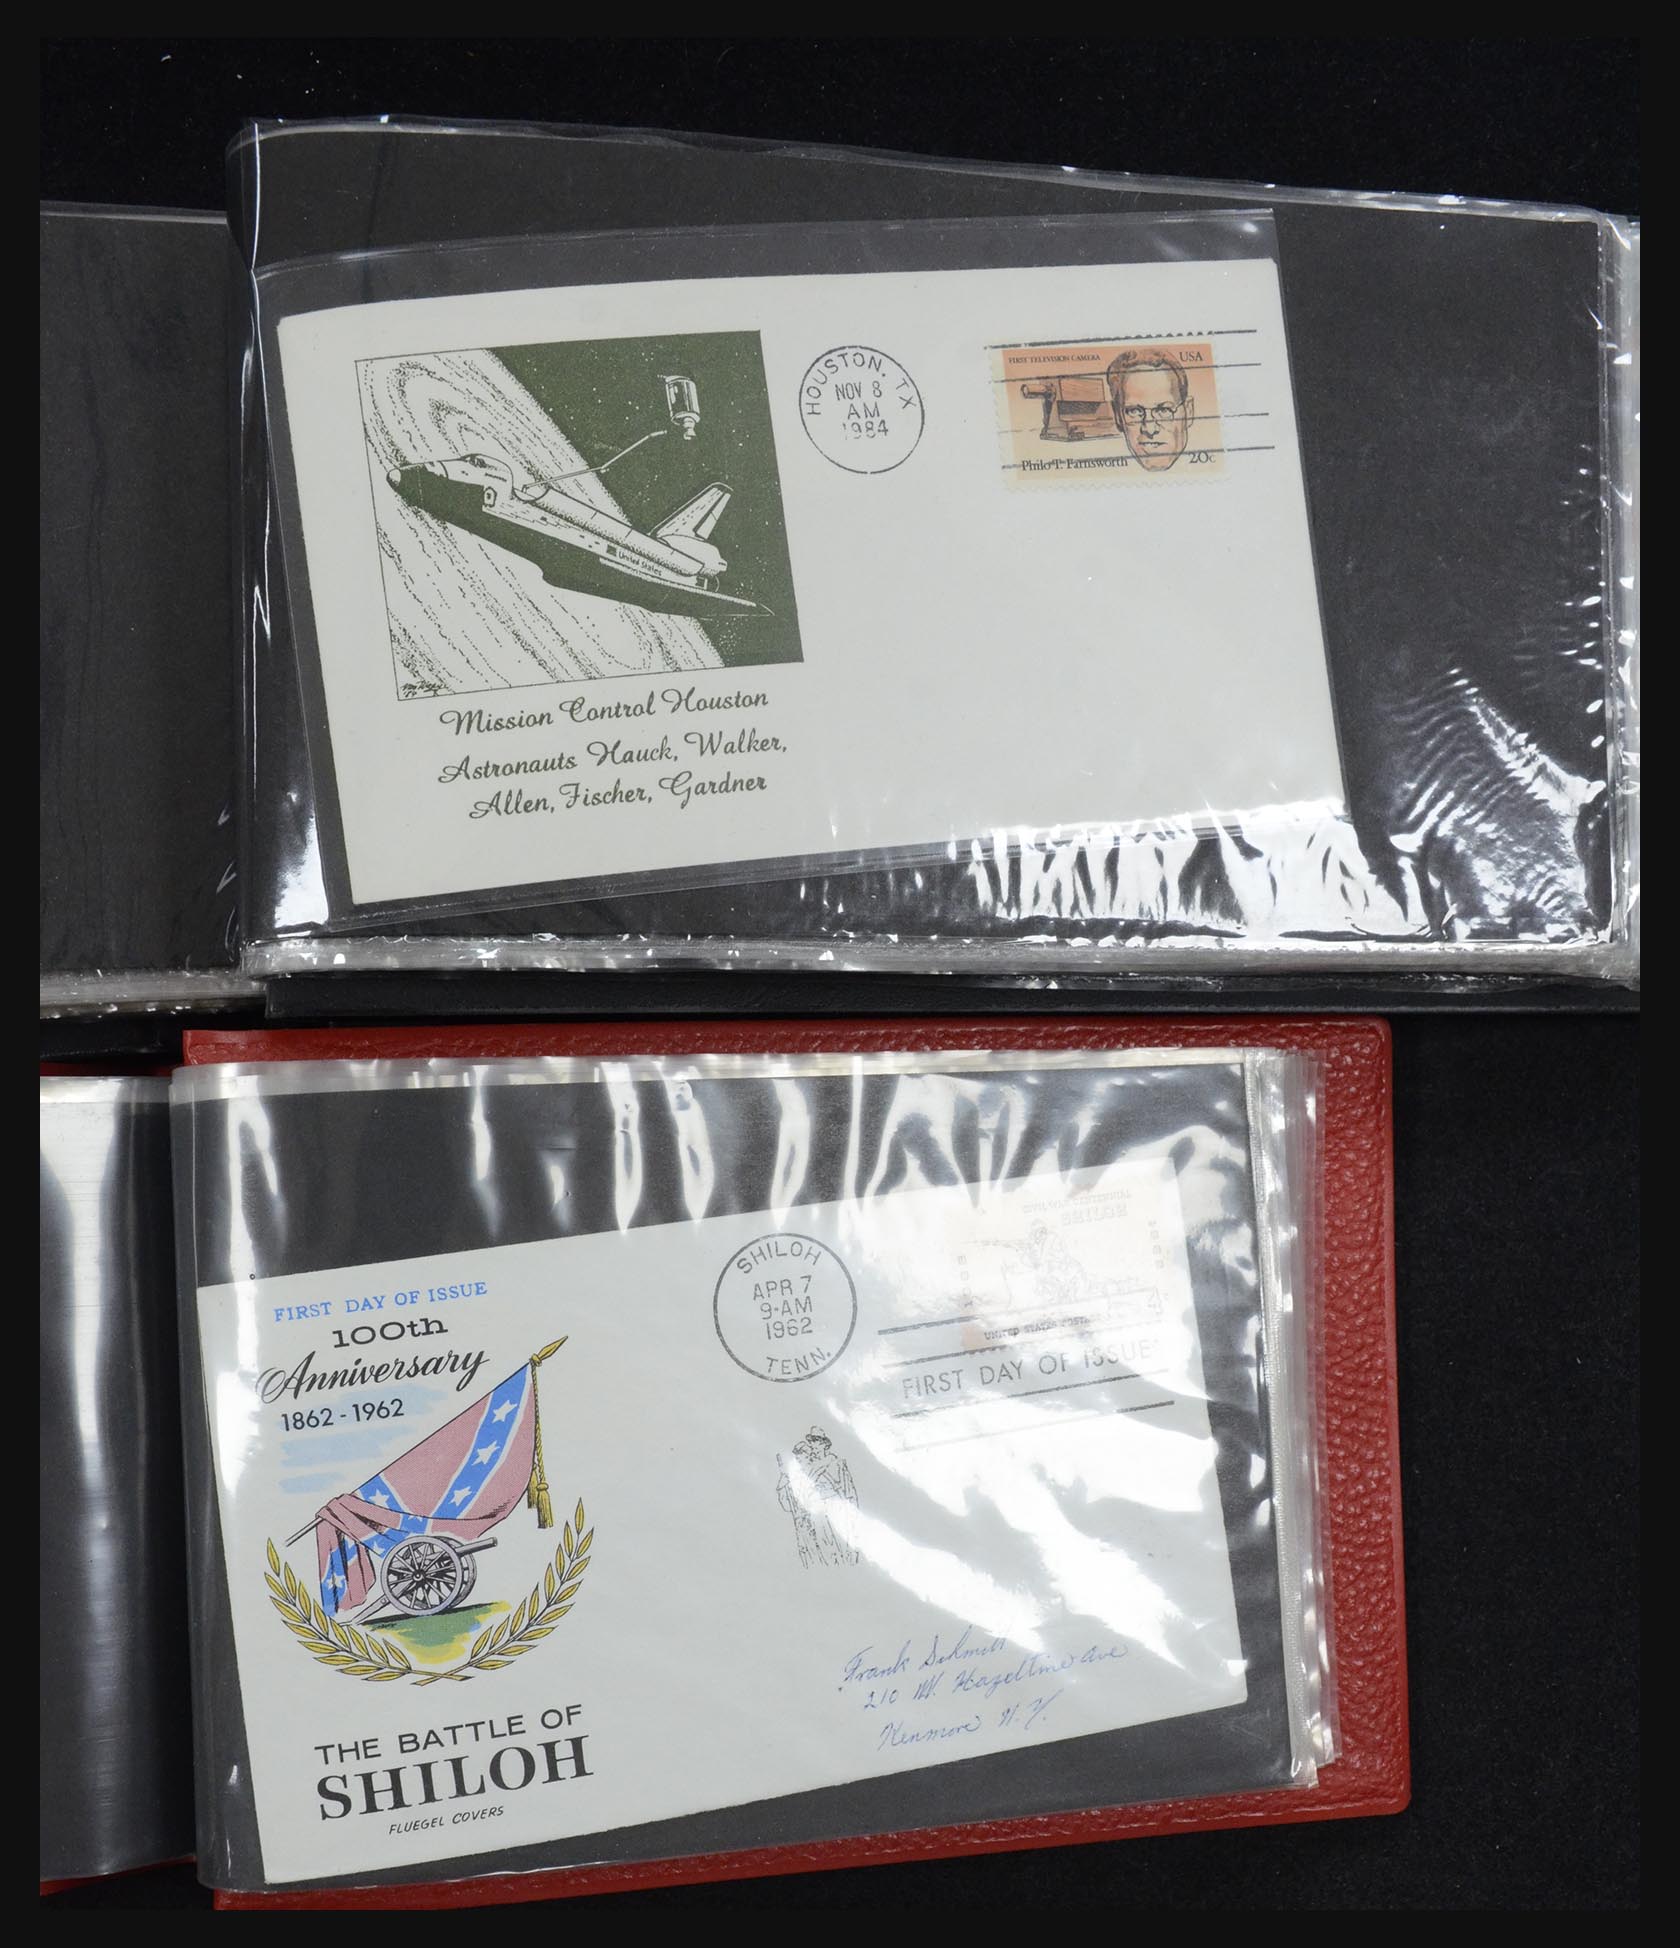 31913 1942 - 31913 USA first day cover collection 1945-1990.